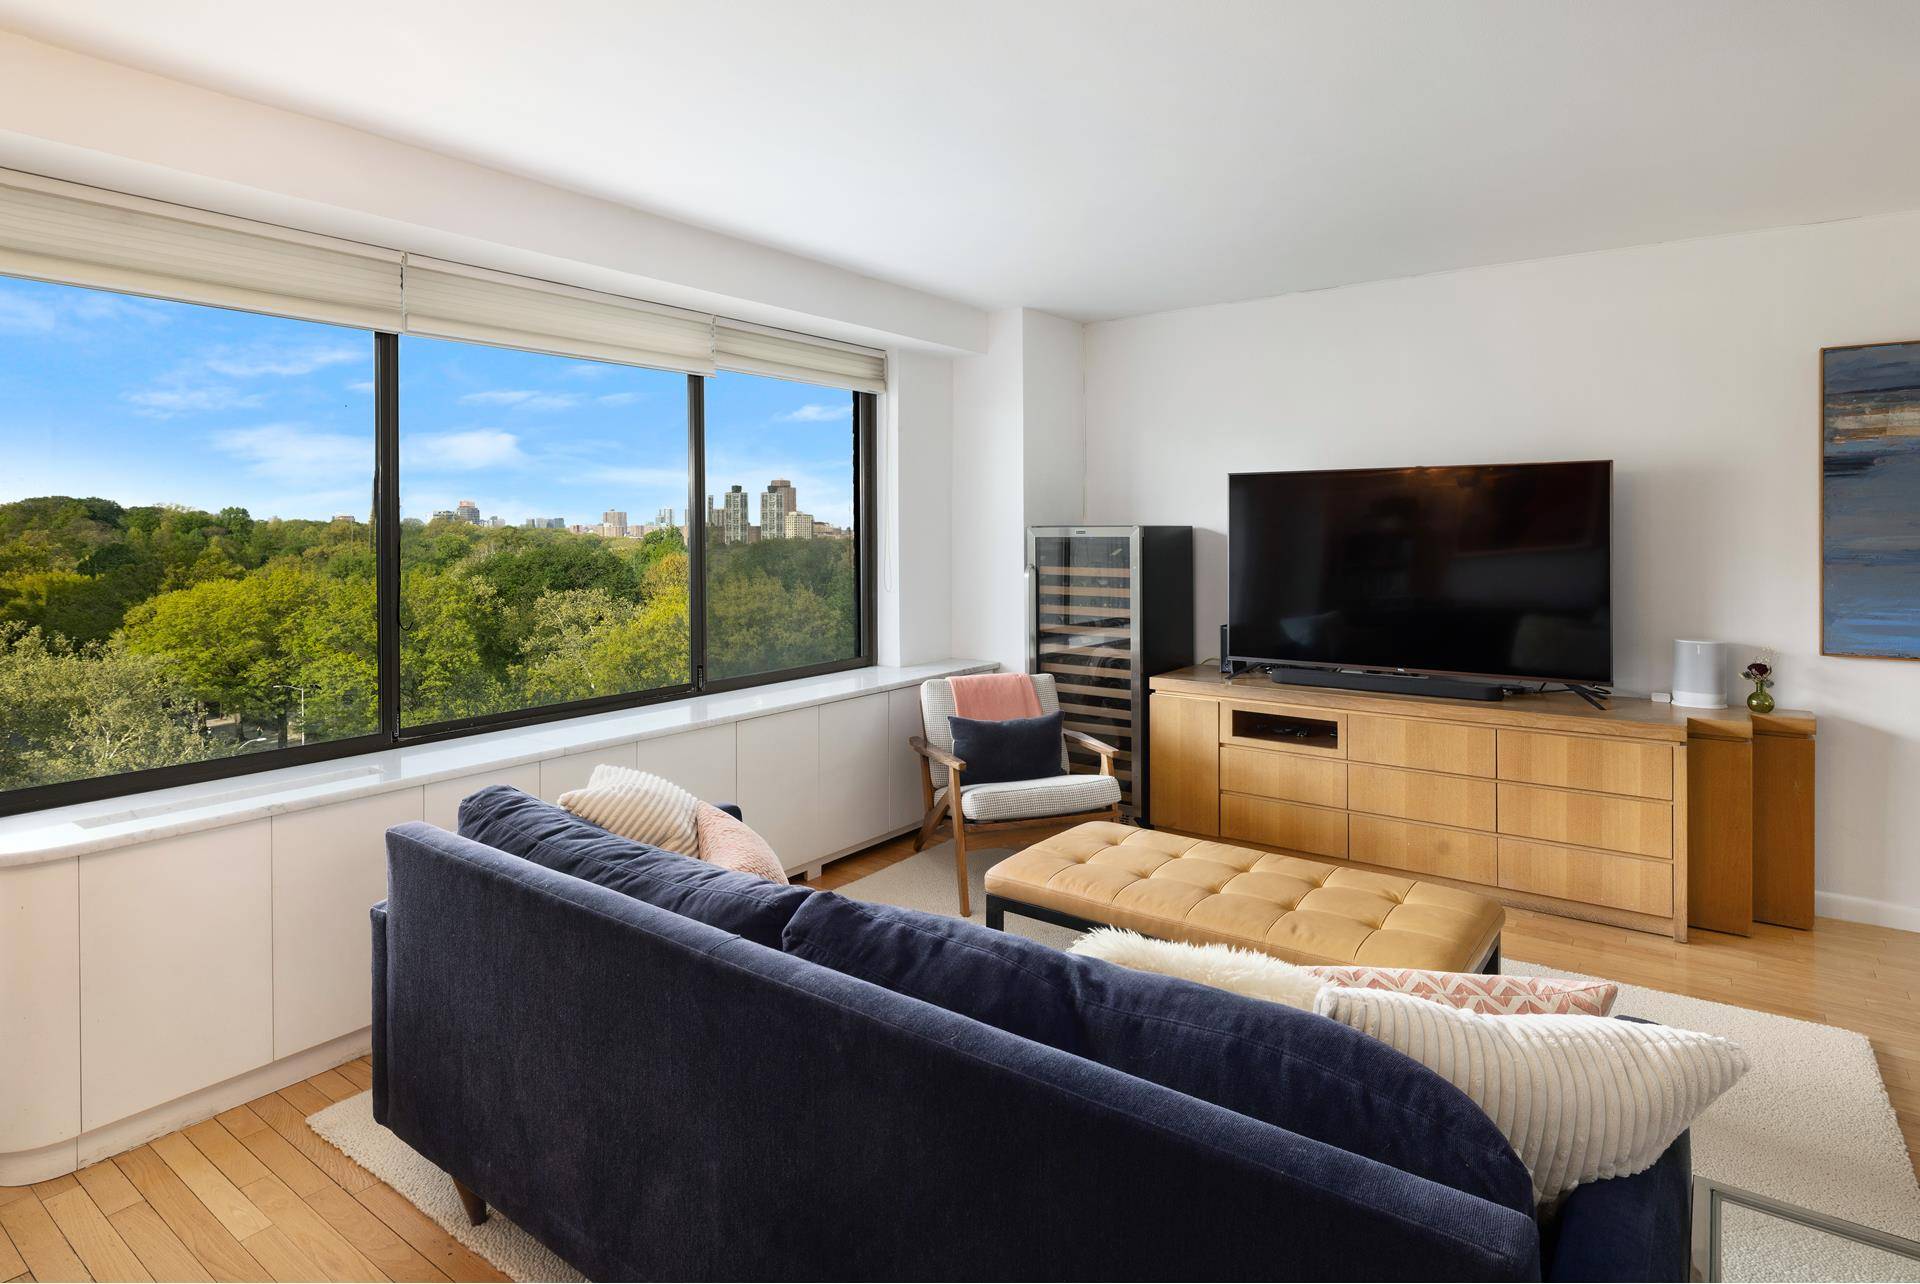 Amazing park and city views delight you every day from this oversize, impeccably renovated 840 square foot one bedroom on the Upper West Side, with a HUGE 130 square foot ...